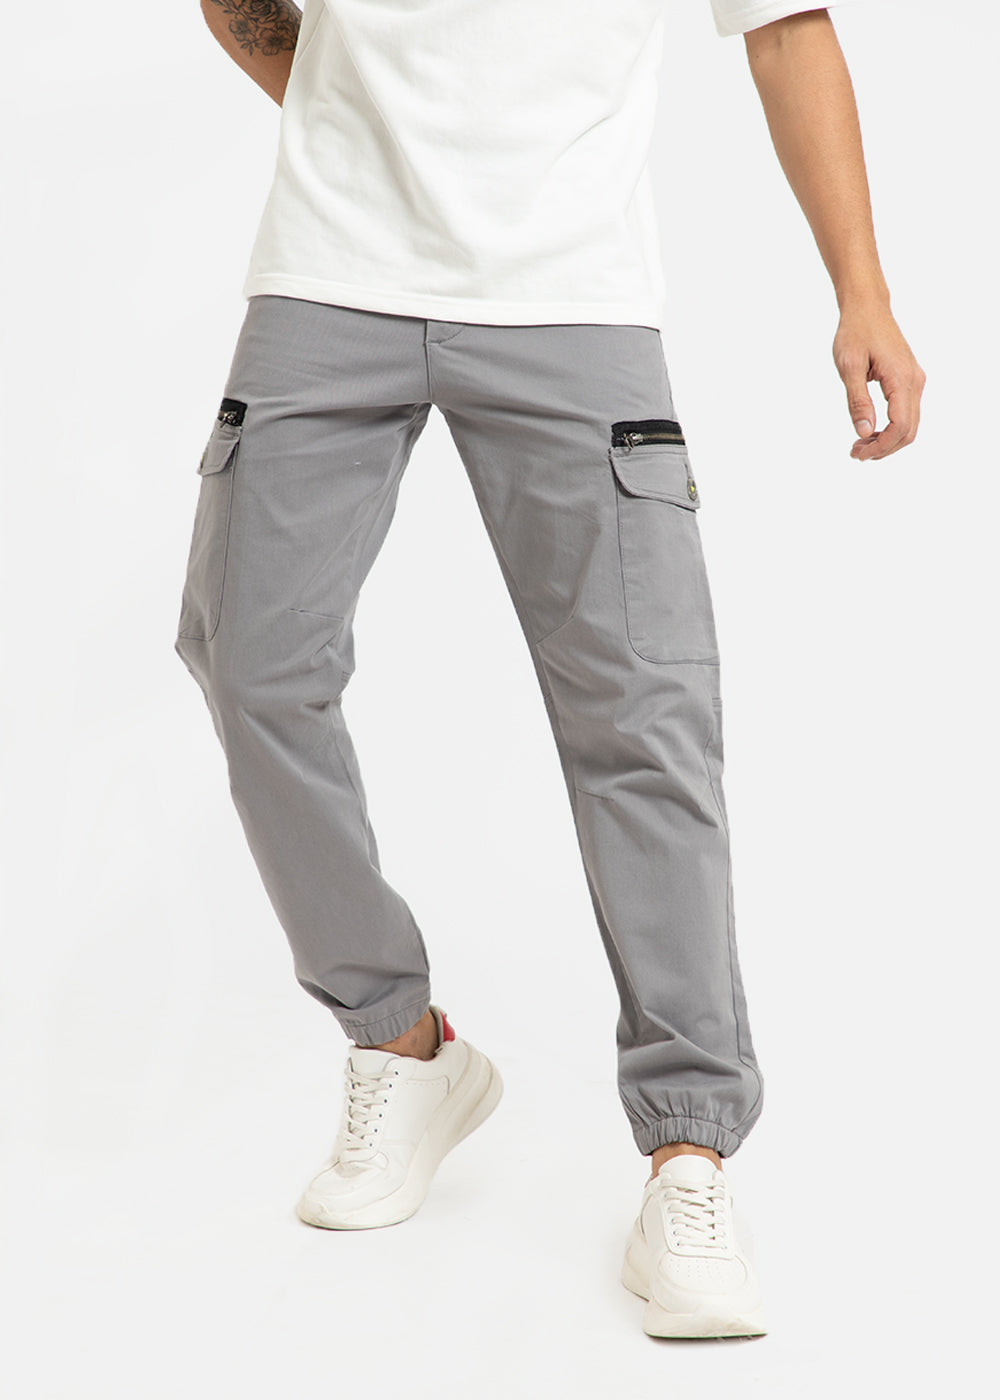 Pewter Gray Elasticated Cargo Pants